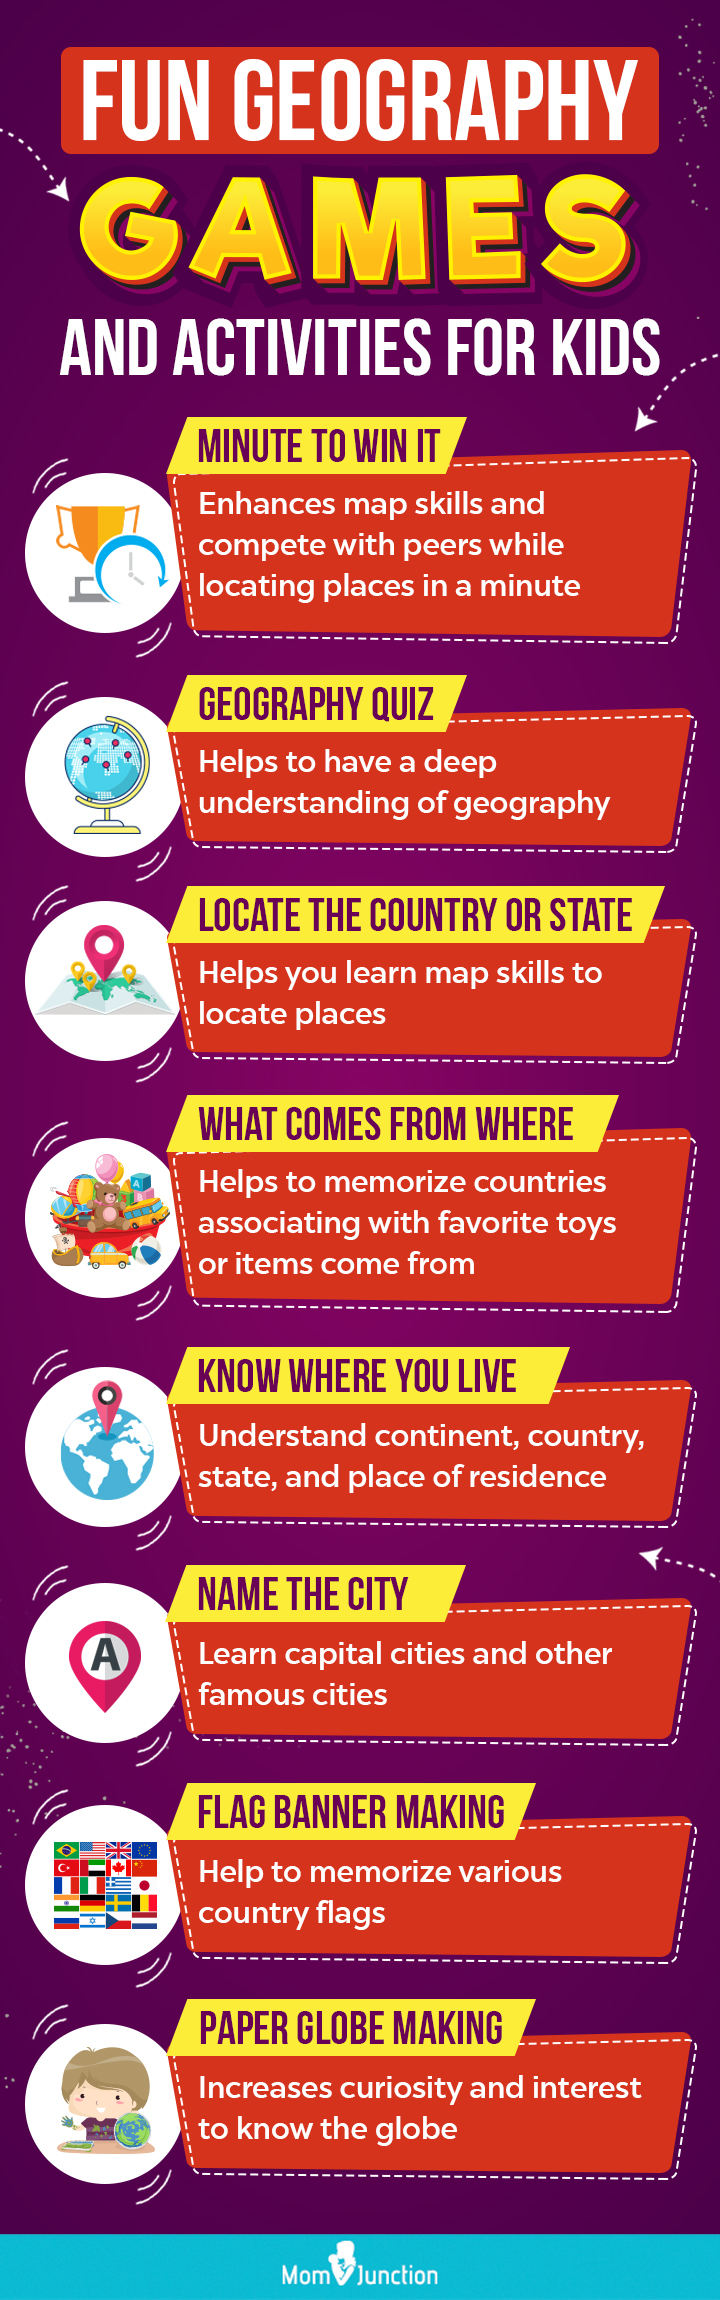 geography games and activities for kids [Infographic]